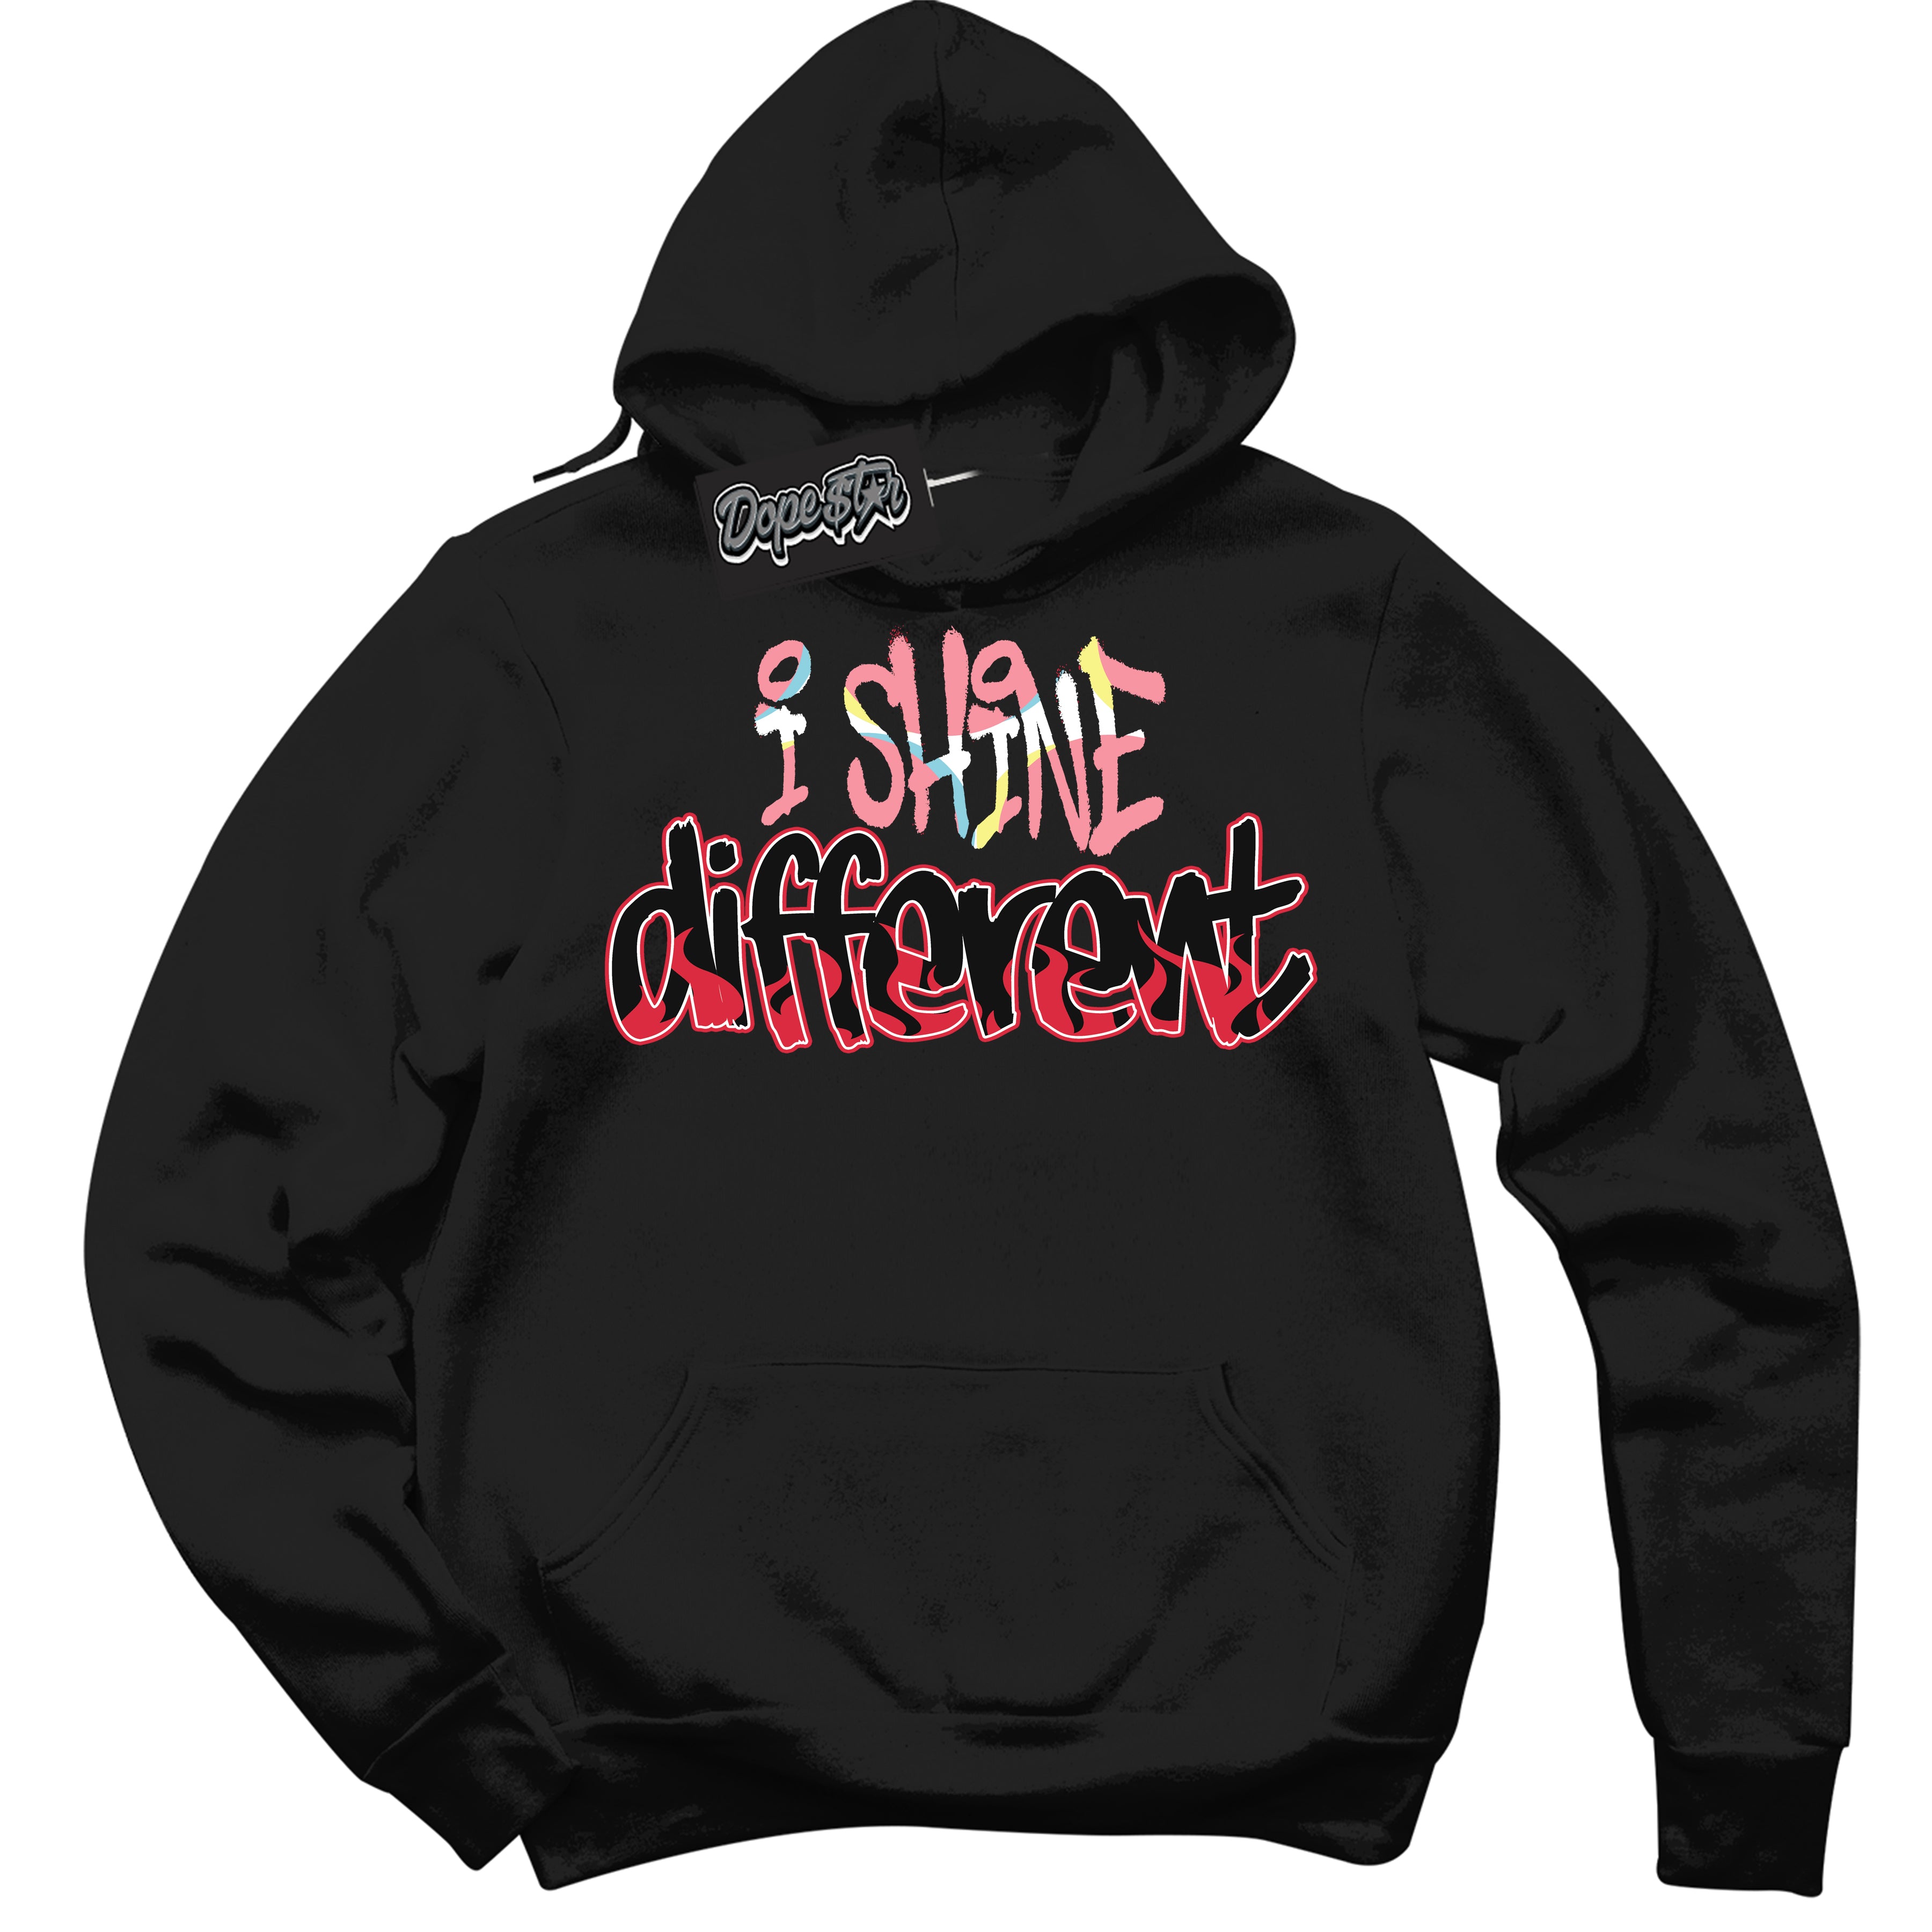 Cool Black Graphic DopeStar Hoodie with “ I Shine Different “ print, that perfectly matches Spider-Verse 1s sneakers